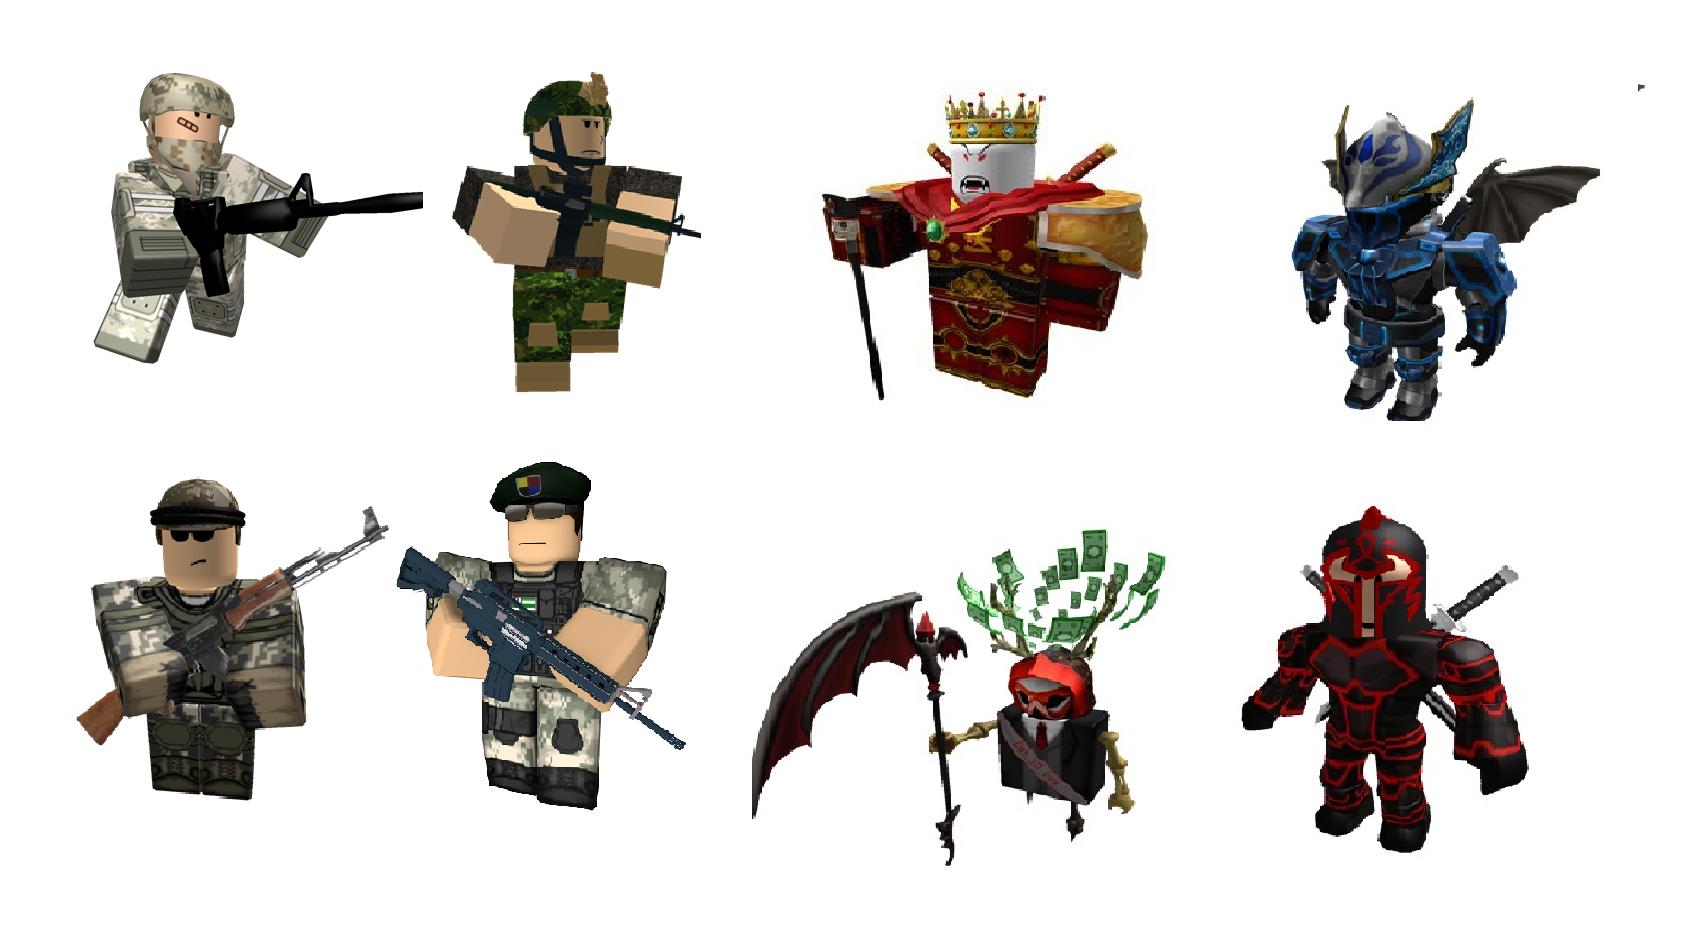 Wallpapers Of Roblox Avatars Ideas For Android Apk Download